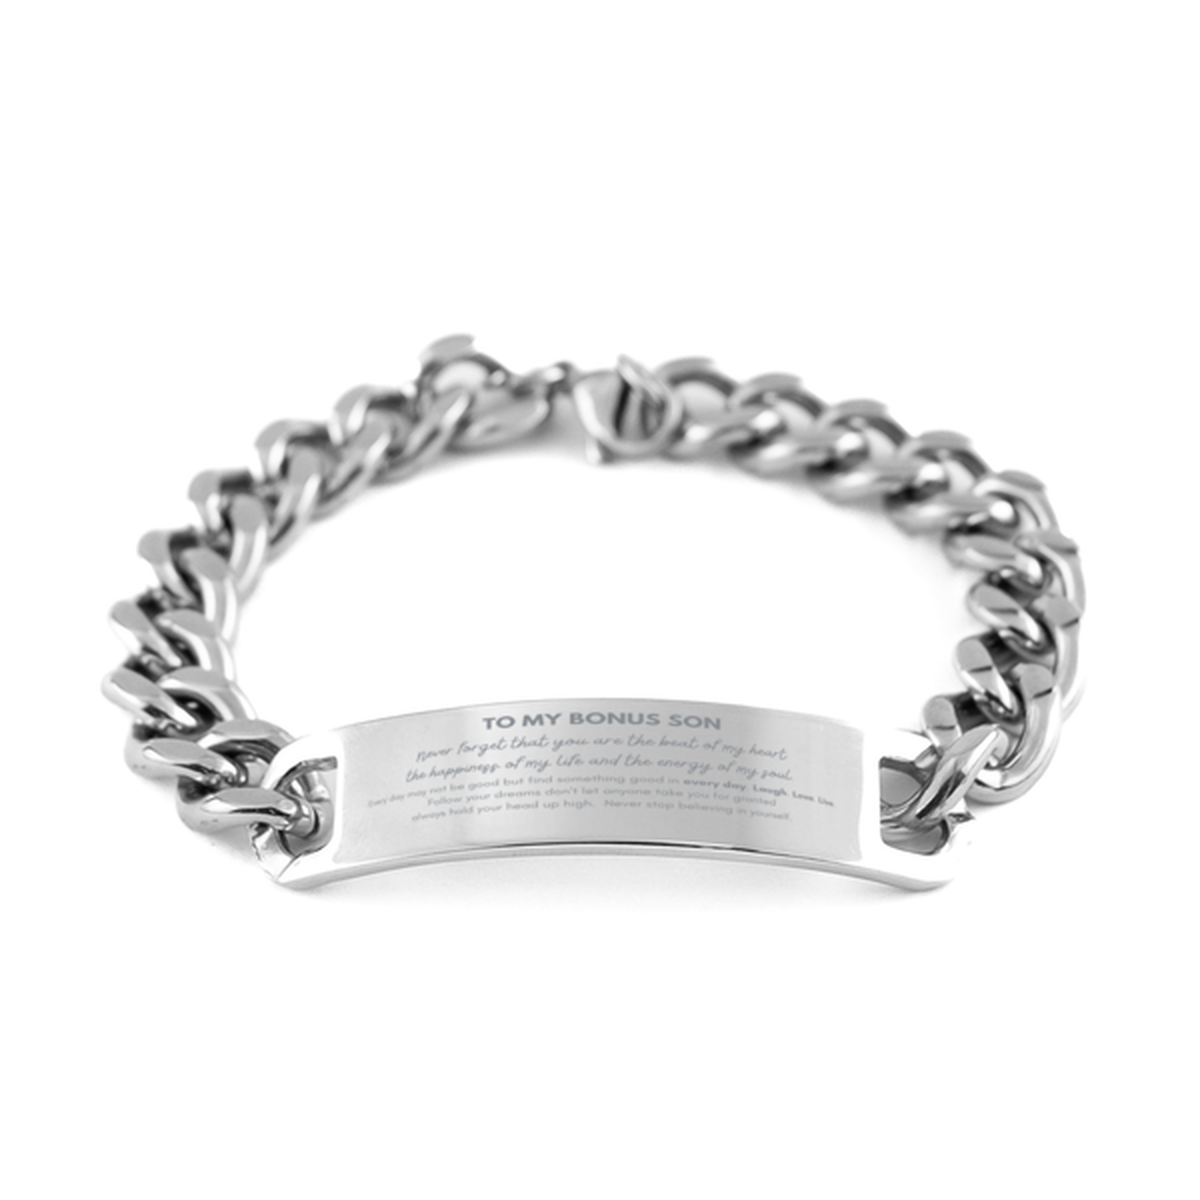 To My Bonus Son Bracelet Gifts, Christmas Bonus Son Cuban Chain Stainless Steel Bracelet Present, Birthday Unique Motivational For Bonus Son, To My Bonus Son Never forget that you are the beat of my heart the happiness of my life and the energy of my soul